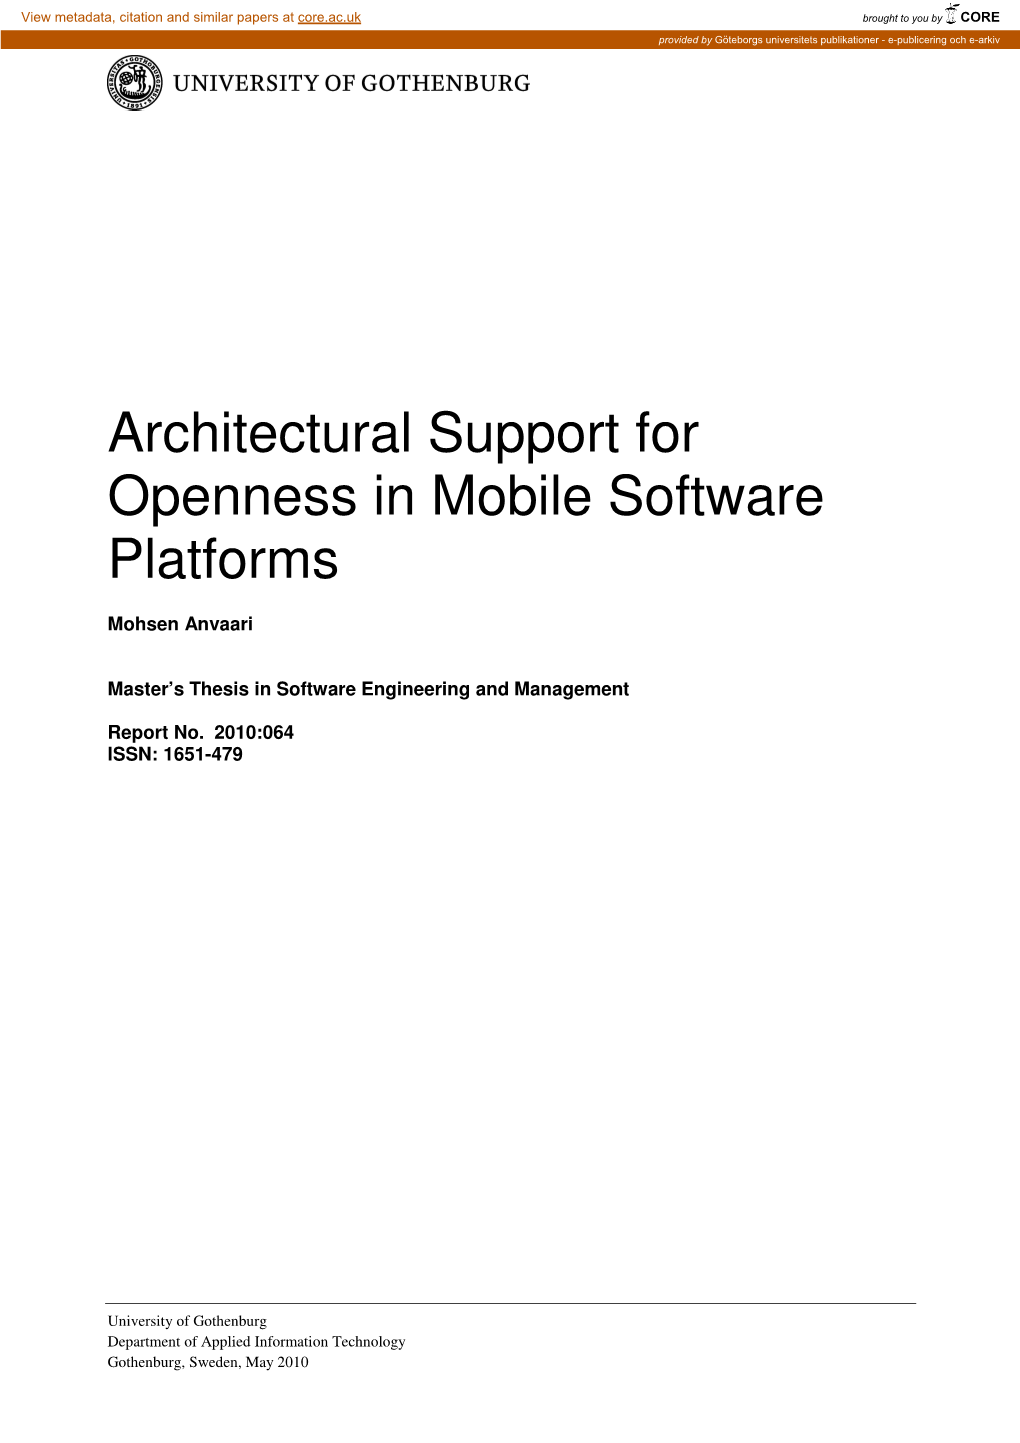 Architectural Support for Openness in Mobile Software Platforms